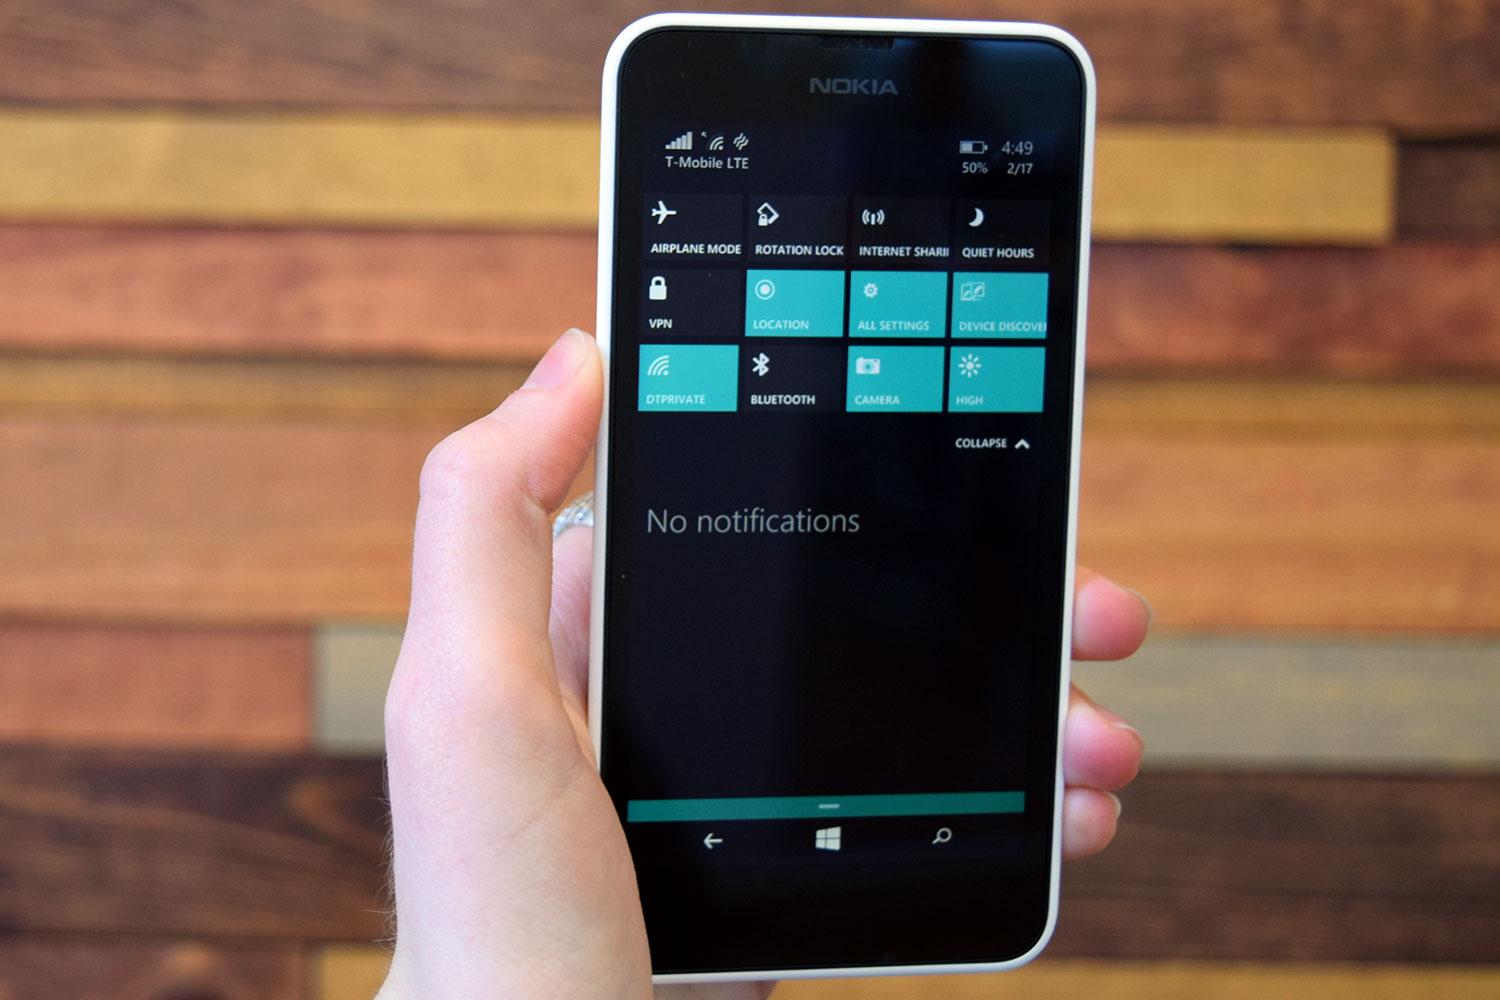 windows 10 technical preview phone hands on lumia 635 0131